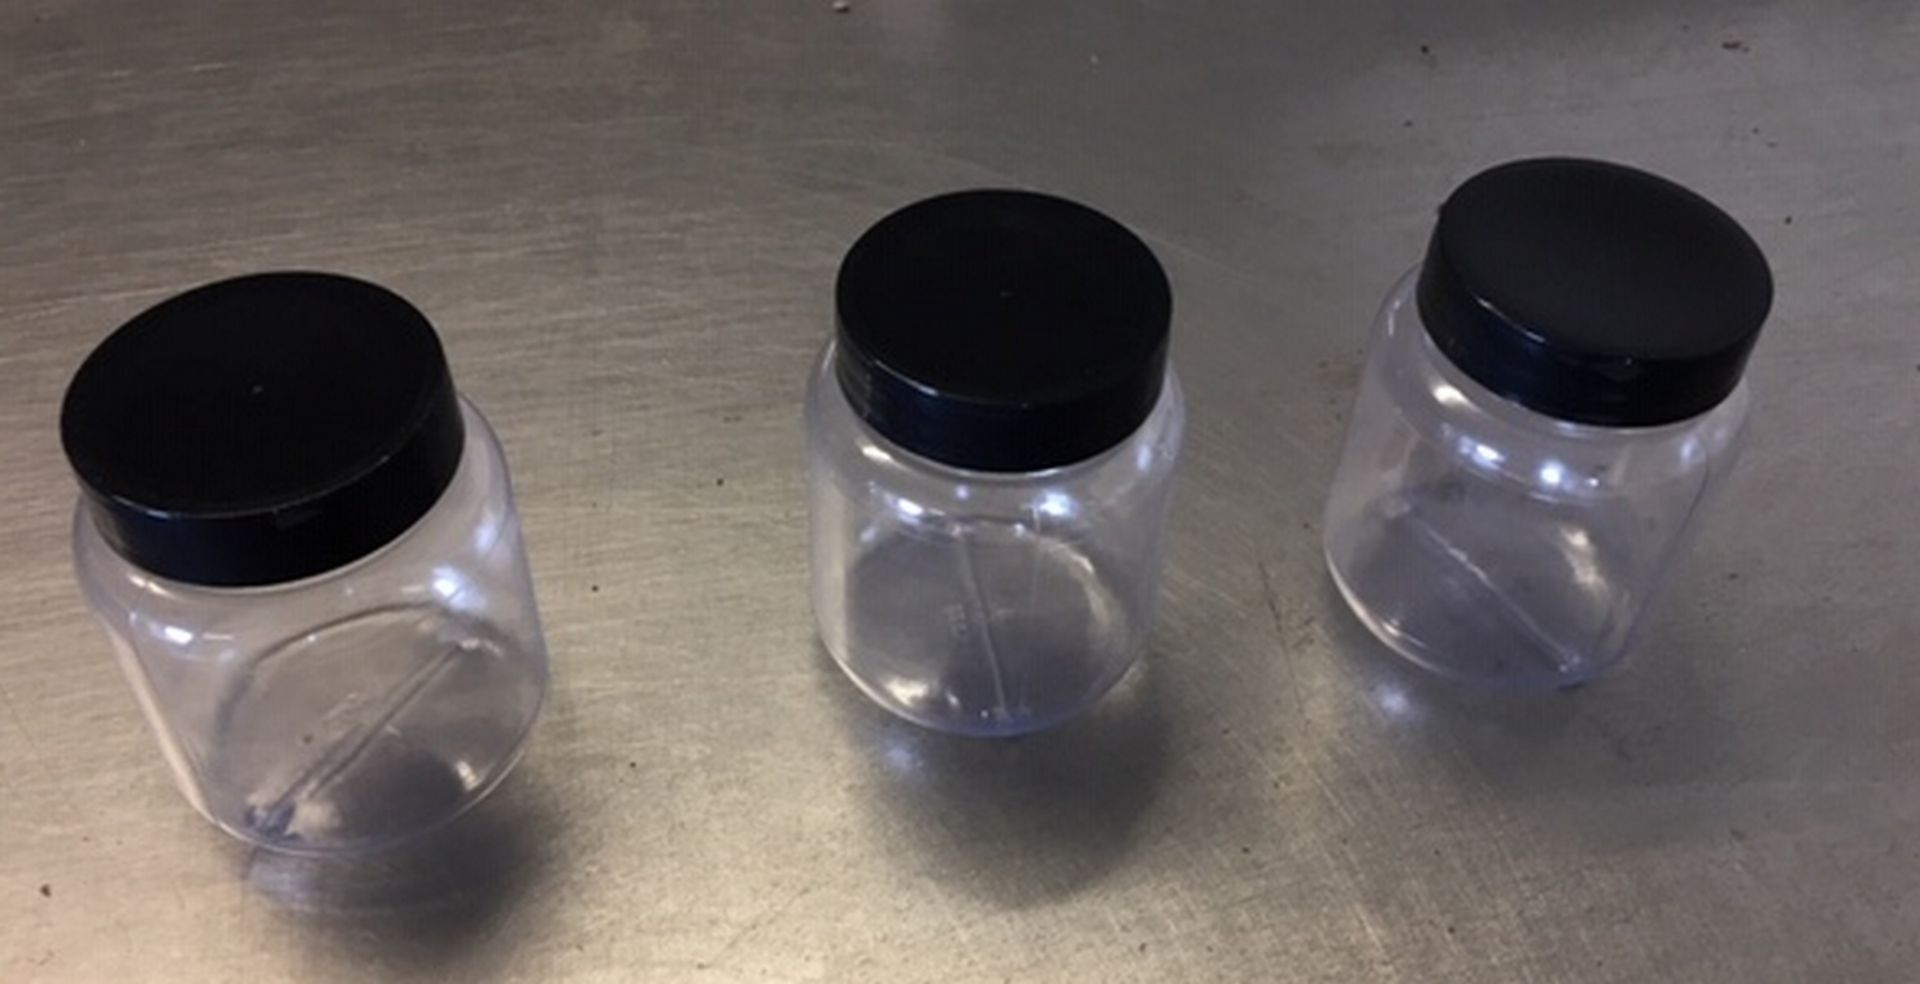 Large Lot of Small Plastic Bottles/Pots with Lids - 68mm tall. - Image 3 of 3